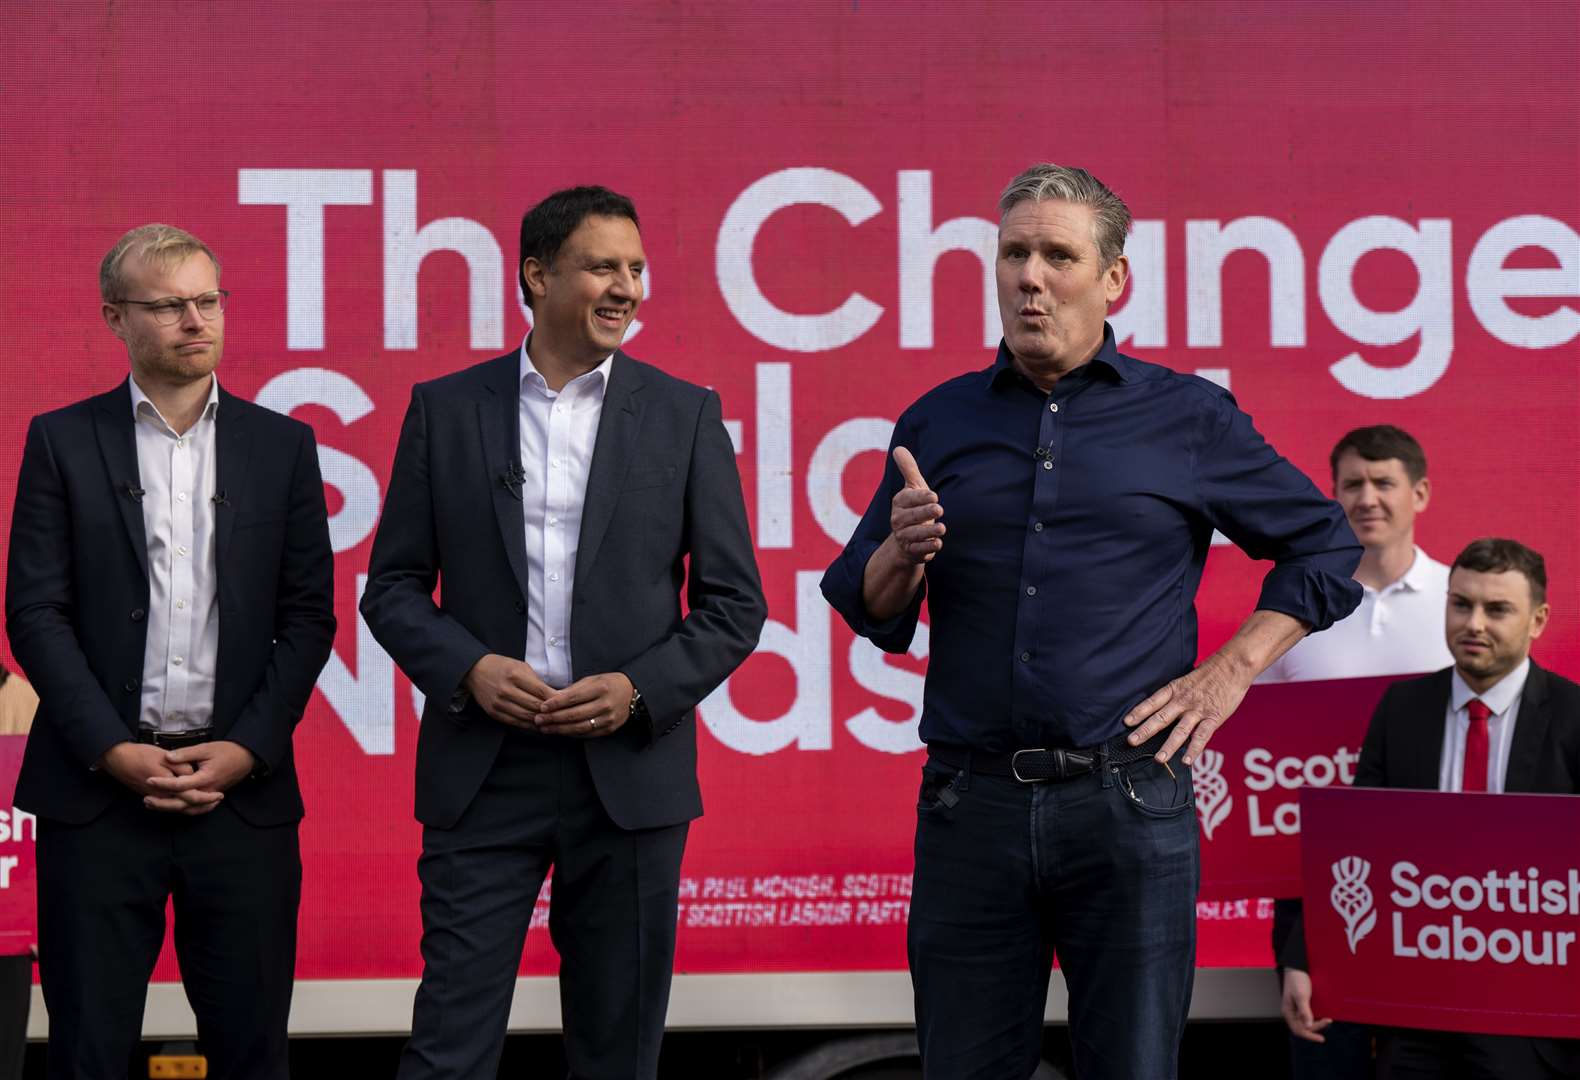 Sir Keir Starmer visited the Rutherglen seat on Friday with Scottish Labour leader Anas Sarwar, centre, to celebrate the party’s newest MP, Michael Shanks, left (PA)